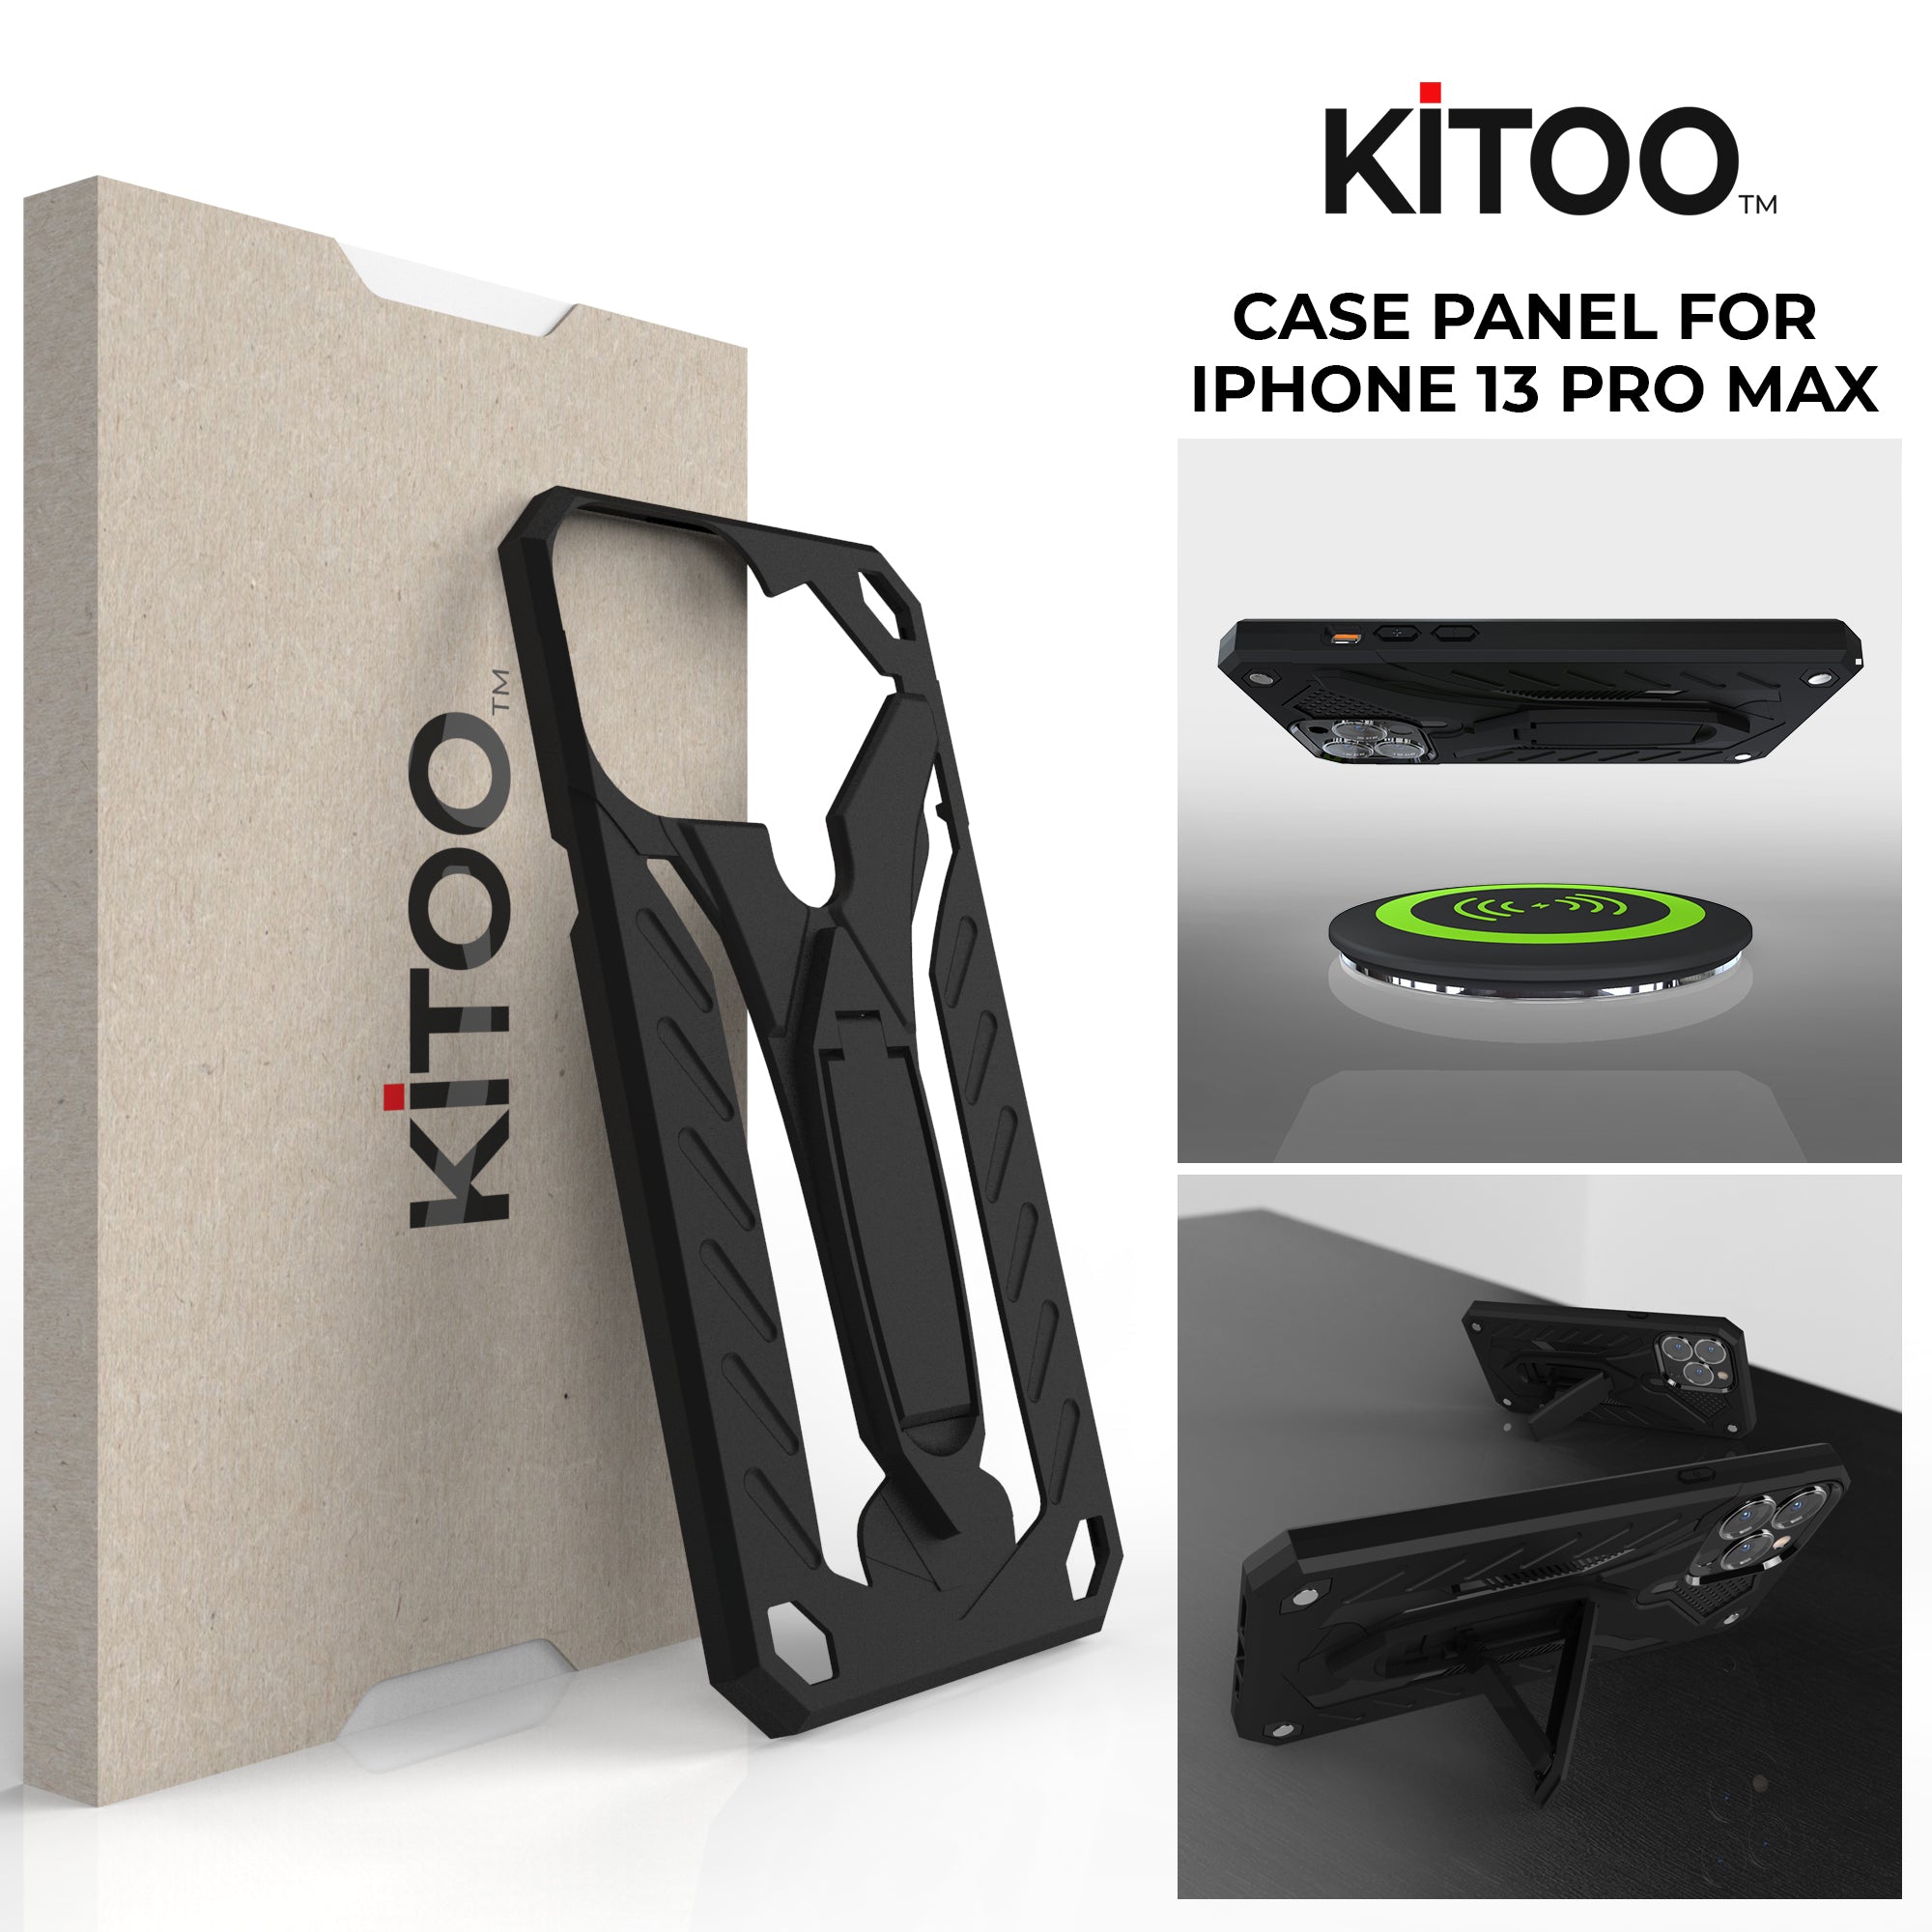 Kitoo Kiсkstand Panel Designed for iPhone 13 Pro Max case (Spare Part only) - Black